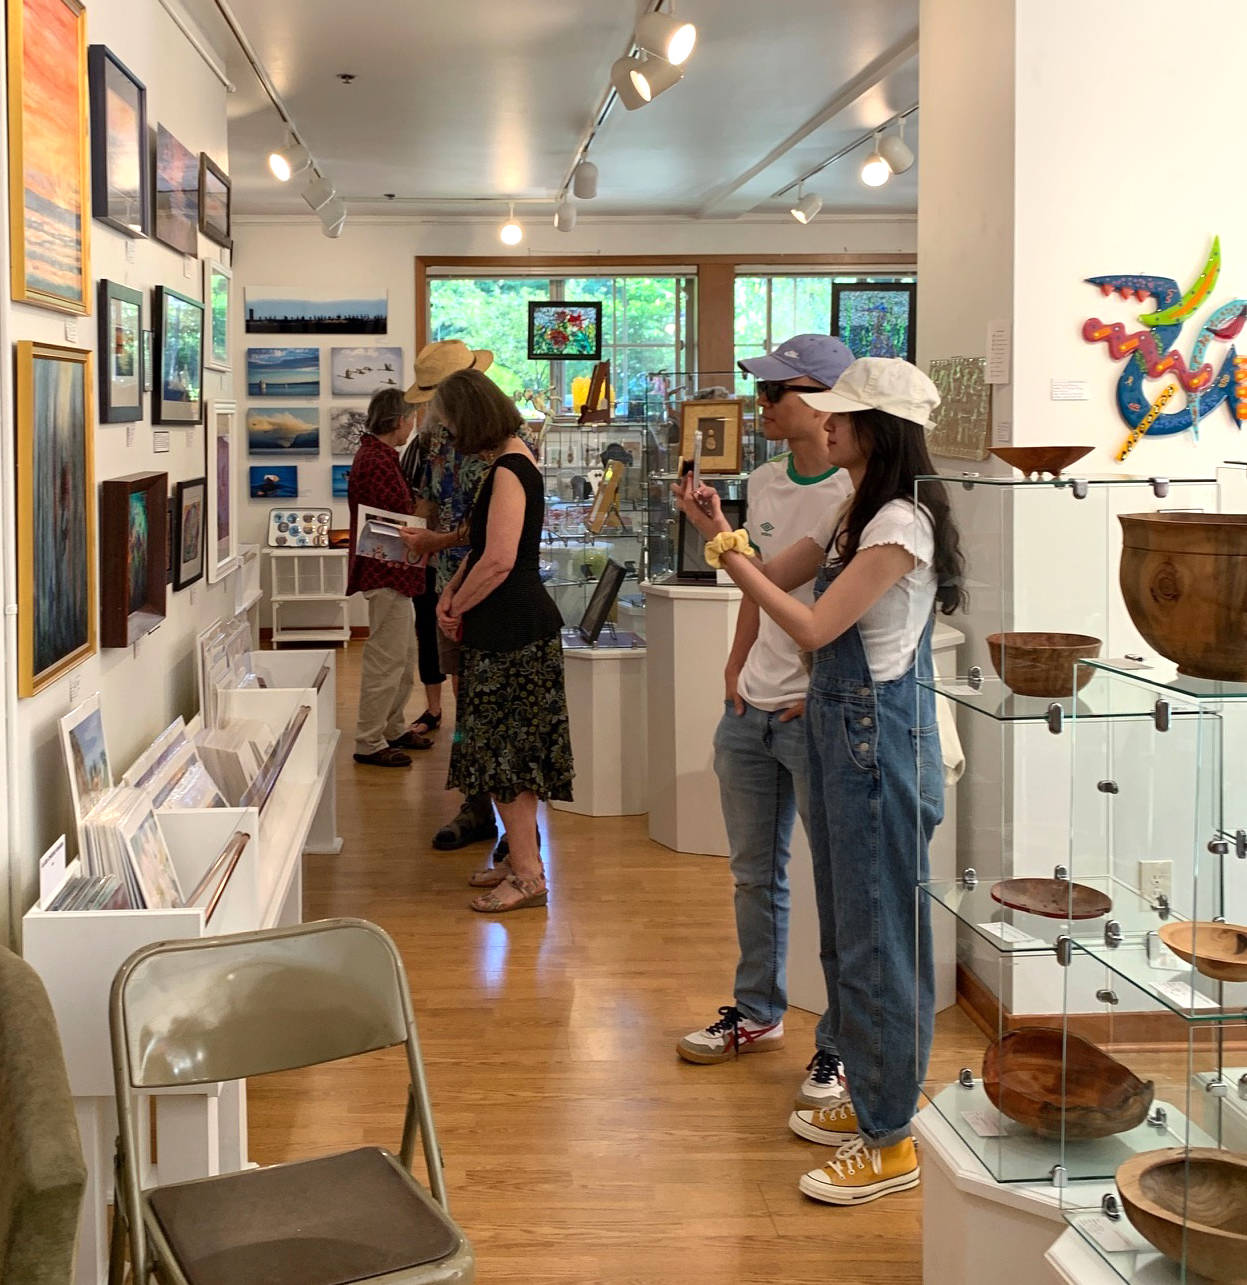 Guests visit Artworks Gallery during July's First Saturday Art Walk. (Photo courtesy of Artworks Gallery)